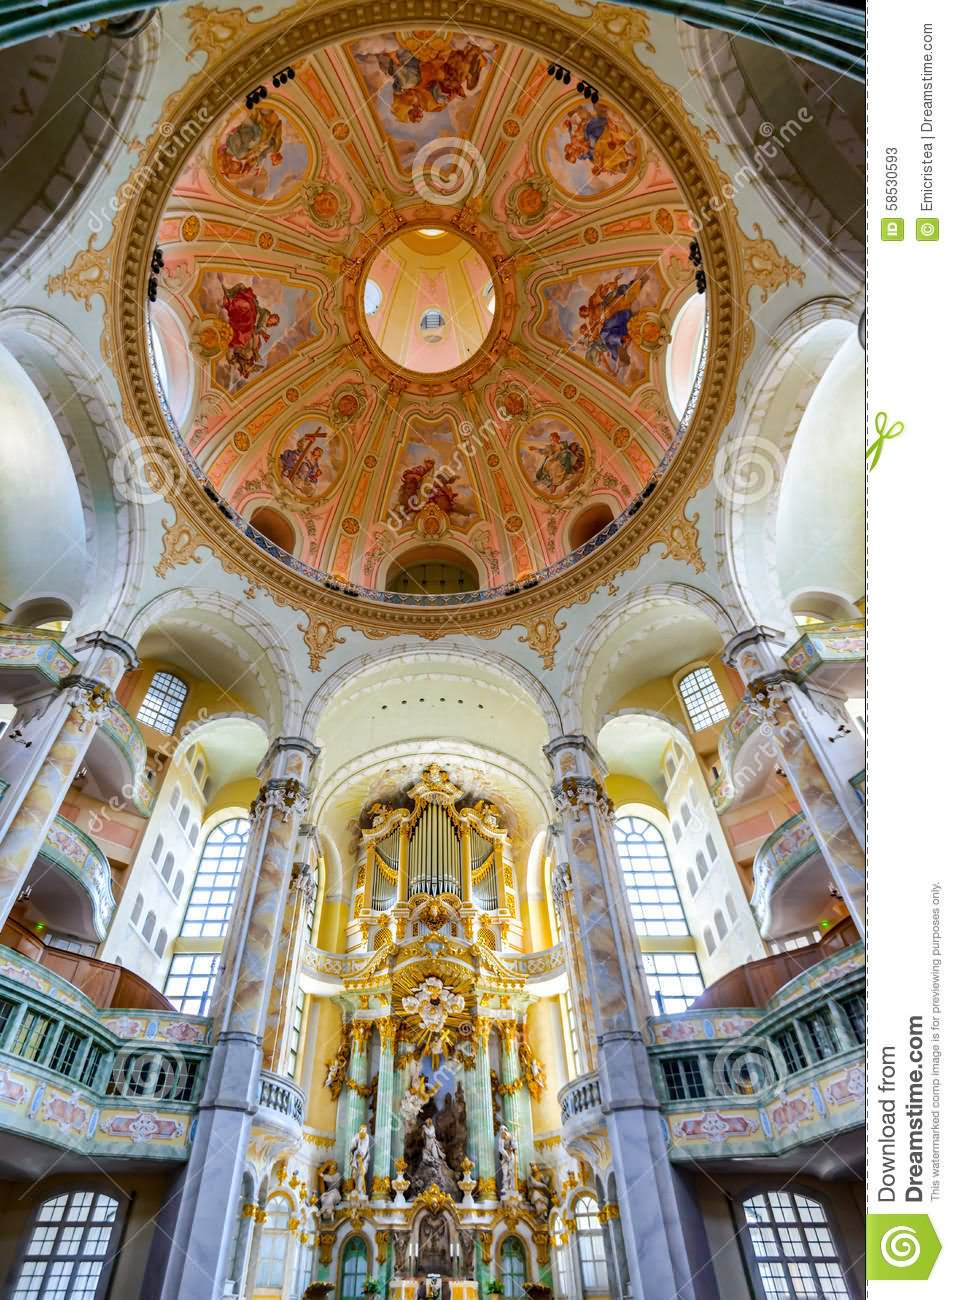 Dome And Altar Inside The Frauenkirche Dresden In Germany